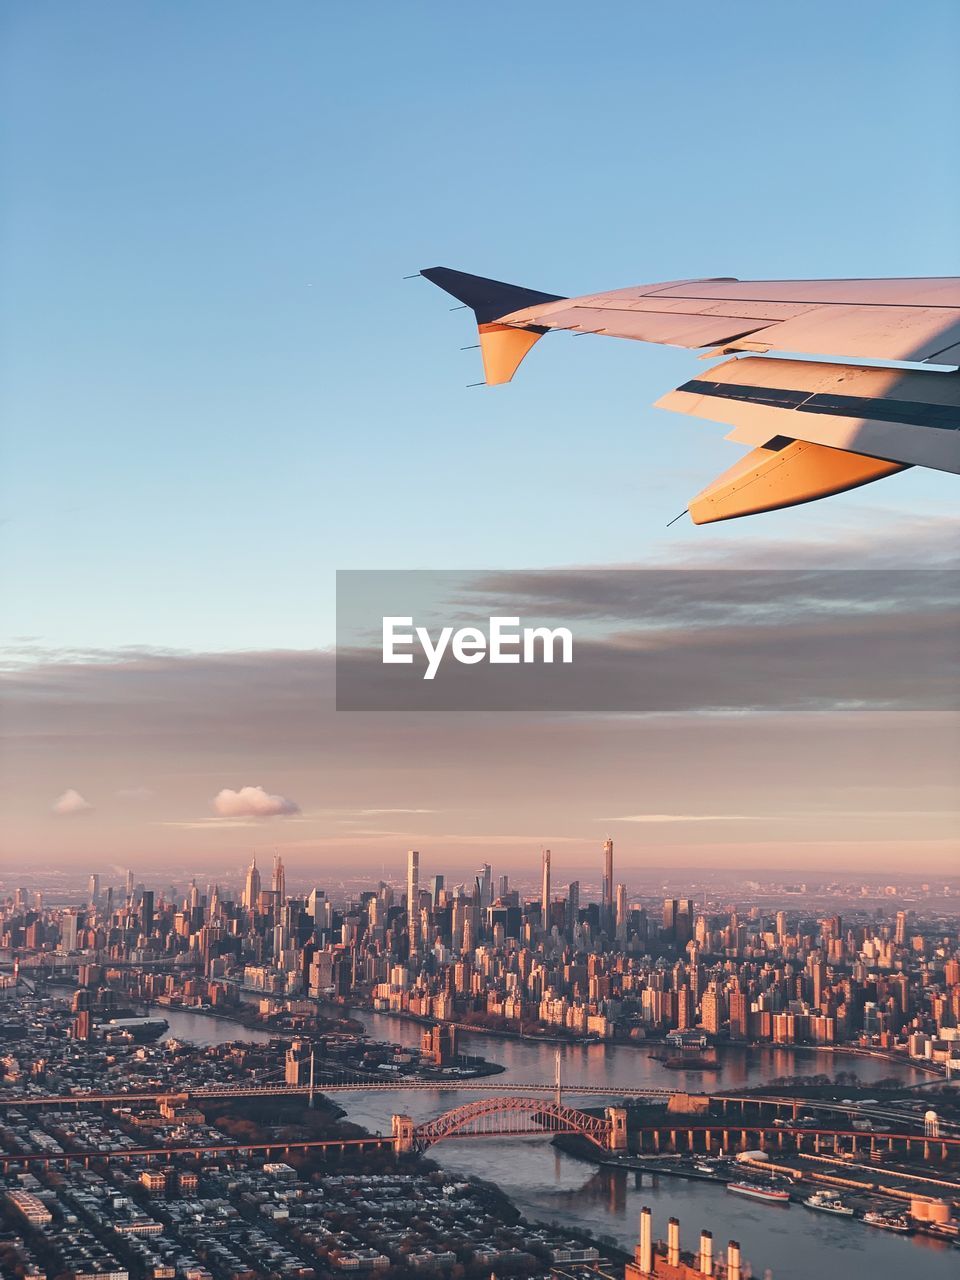 Cropped image of airplane flying over cityscape against sky